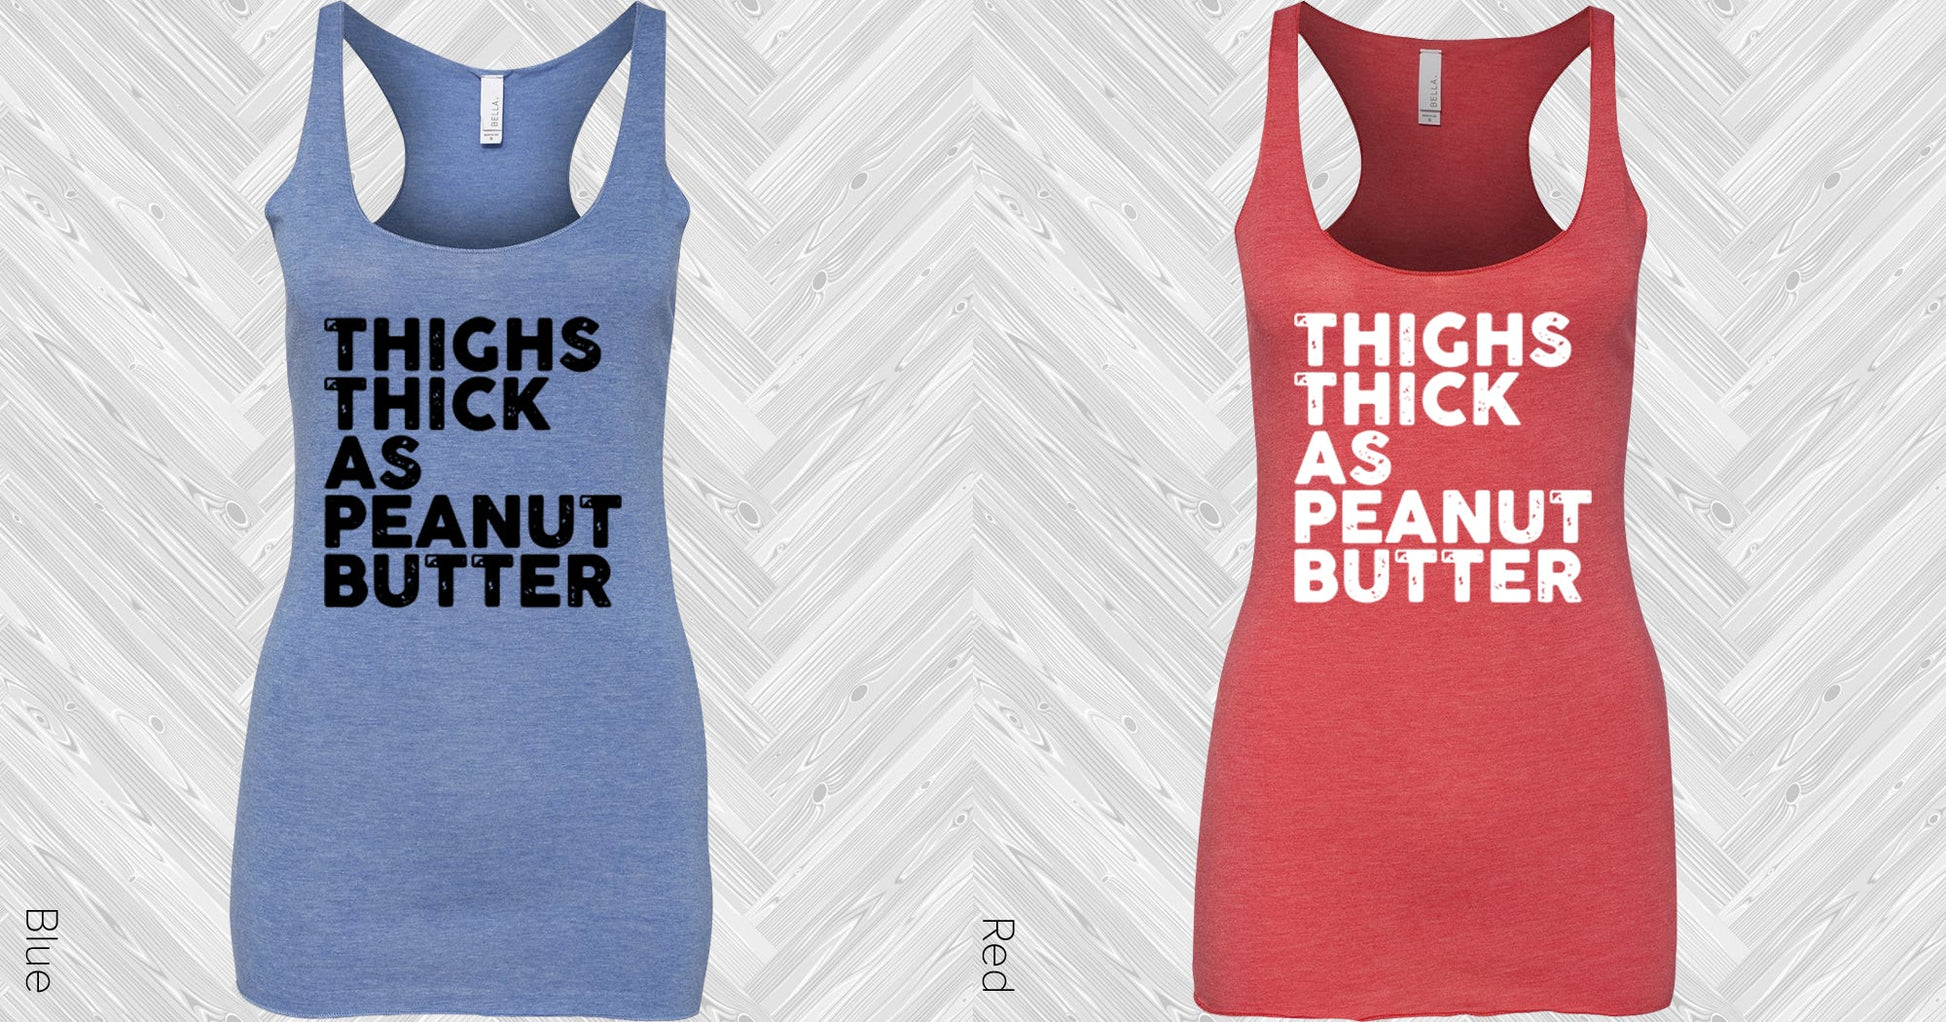 Thighs Thick As Peanut Butter Graphic Tee Graphic Tee